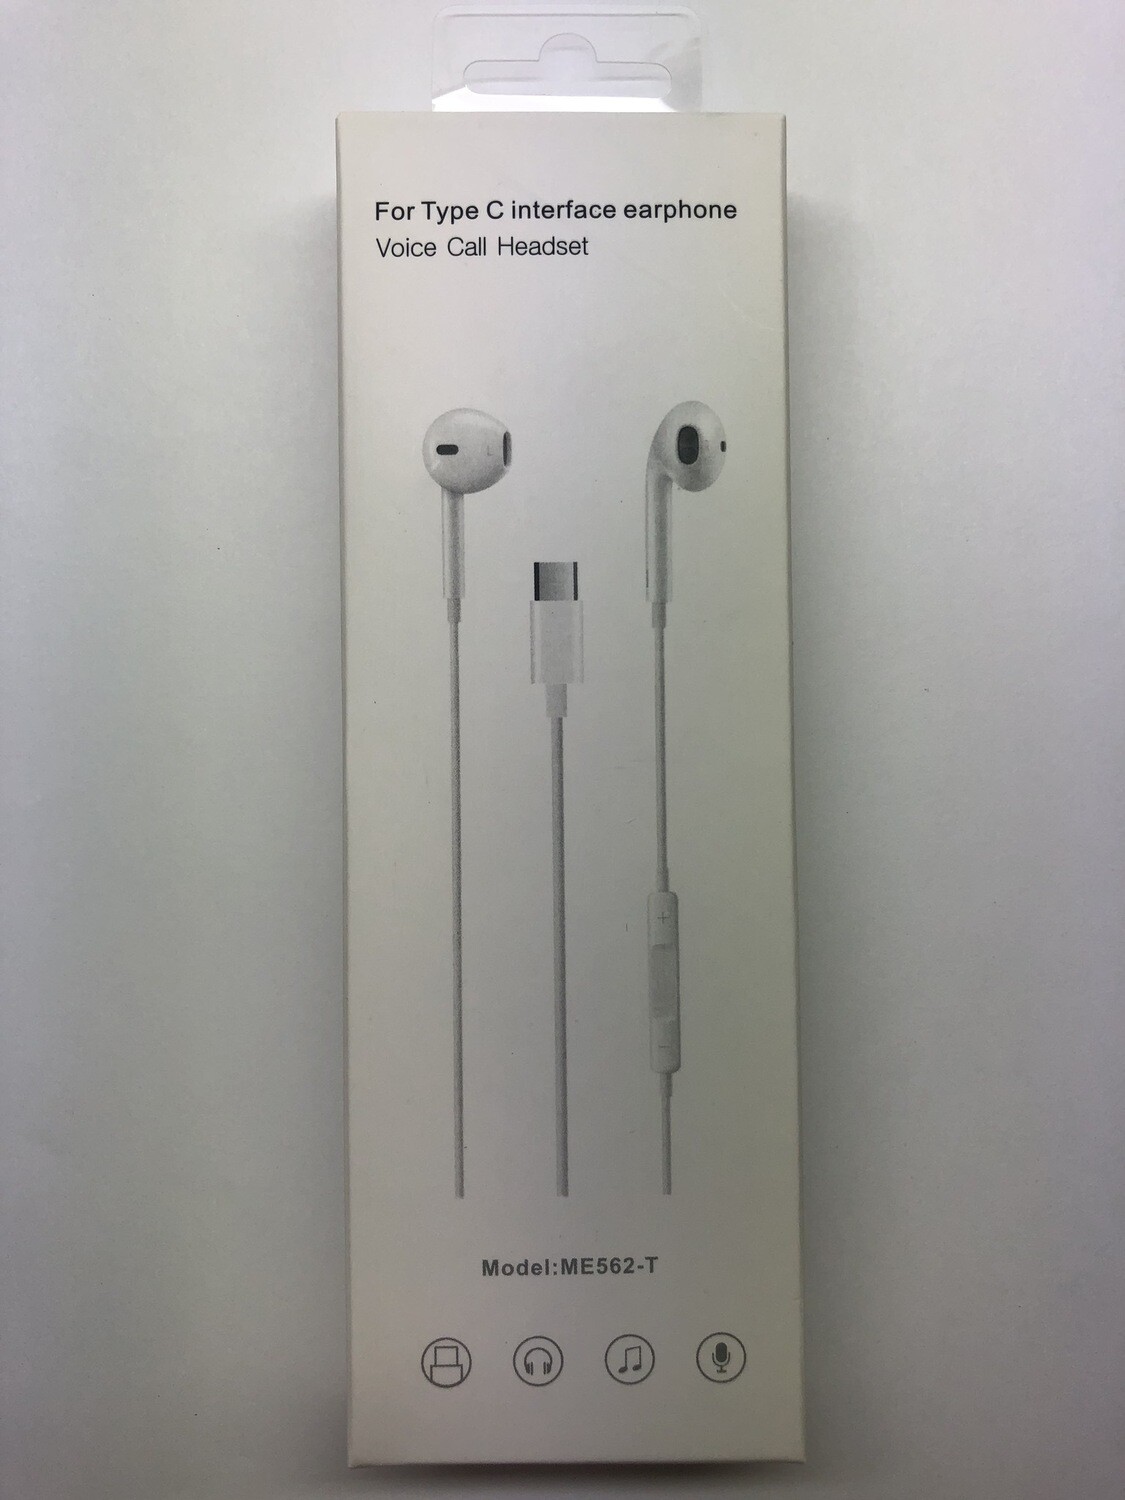 For Type C Interface Earphone (Voice Call Headset)